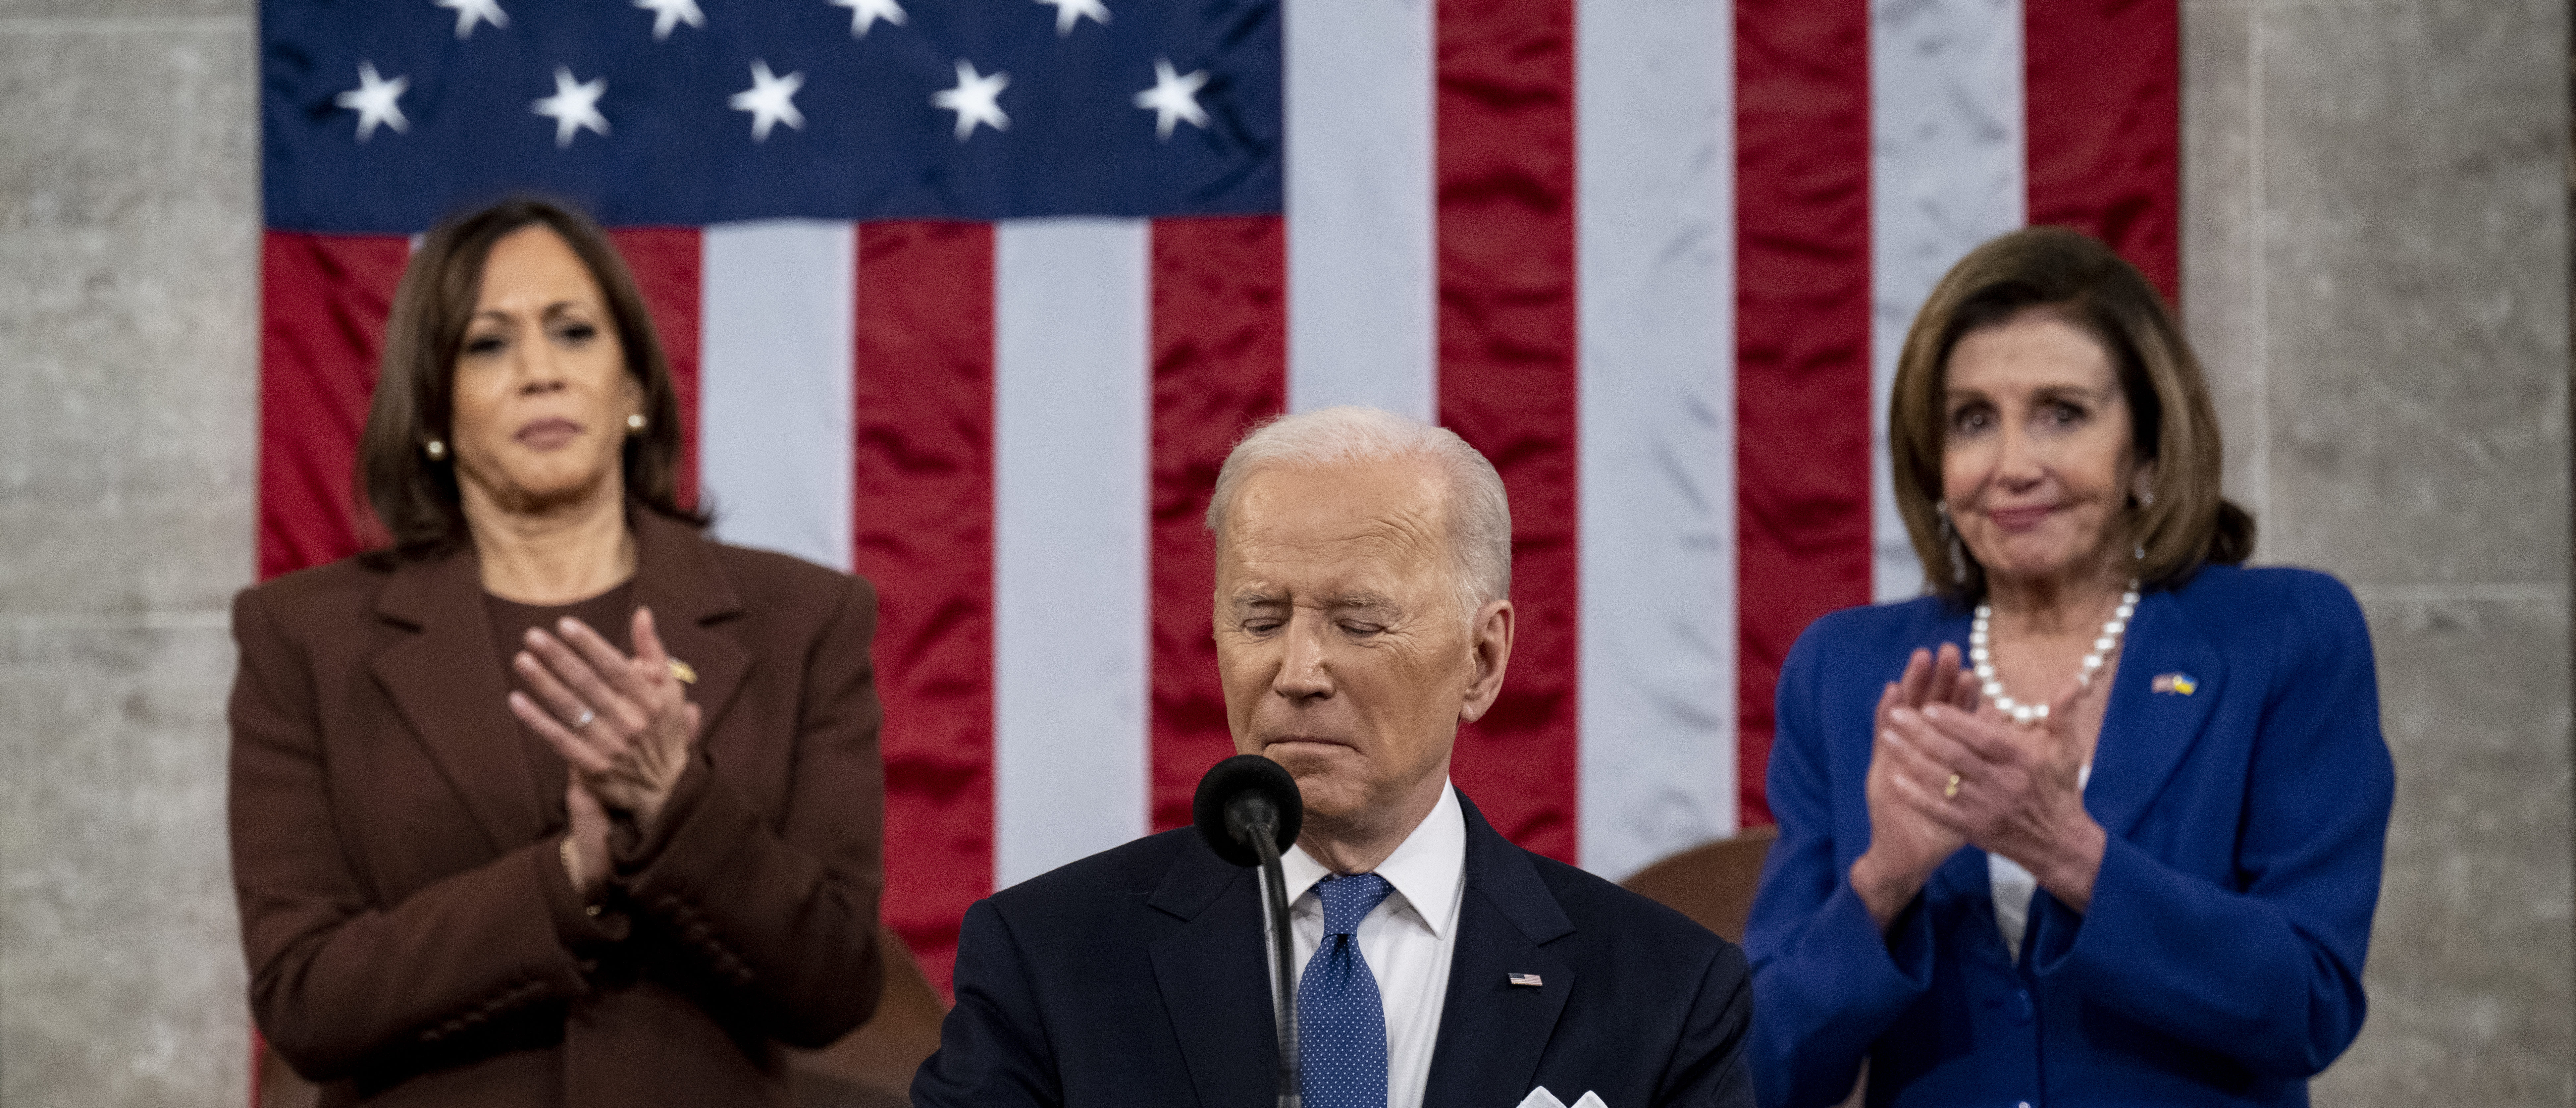 WASHINGTON, DC - MARCH 01: US President Joe Biden delivers the State of the Union address as U.S. Vice President Kamala Harris (L) and House Speaker Nancy Pelosi (D-CA) applaud during a joint session of Congress in the U.S. Capitol House Chamber on March 1, (Photo by Saul Loeb - Pool/Getty Images)